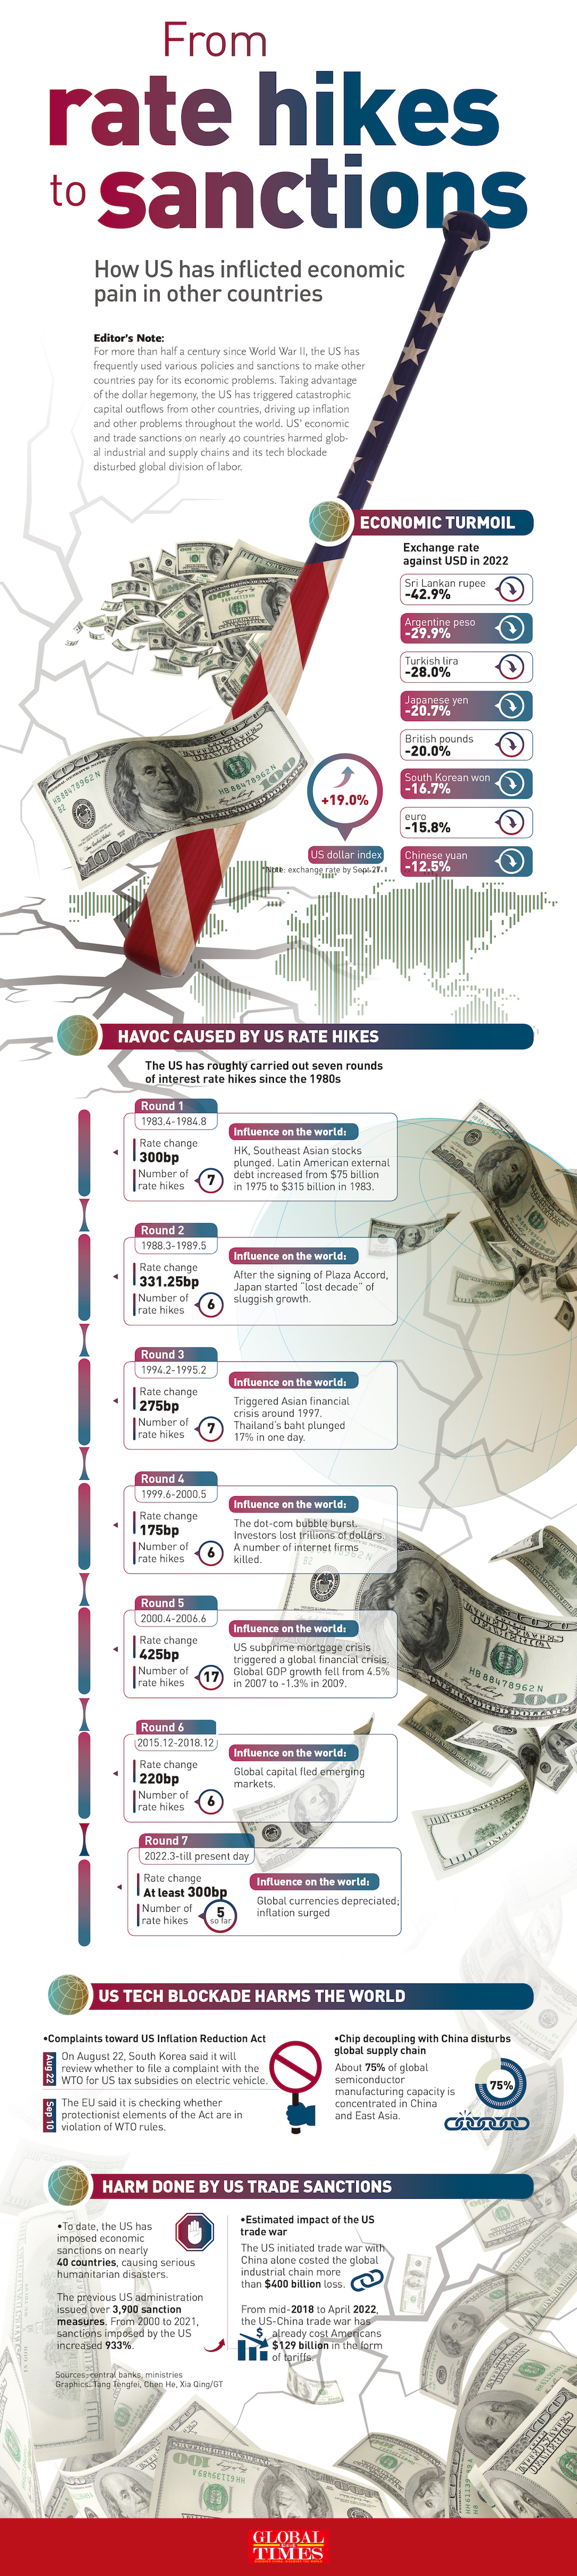 From rate hikes to sanctions: how US has inflicted economic pain in other countries Infographic: GT